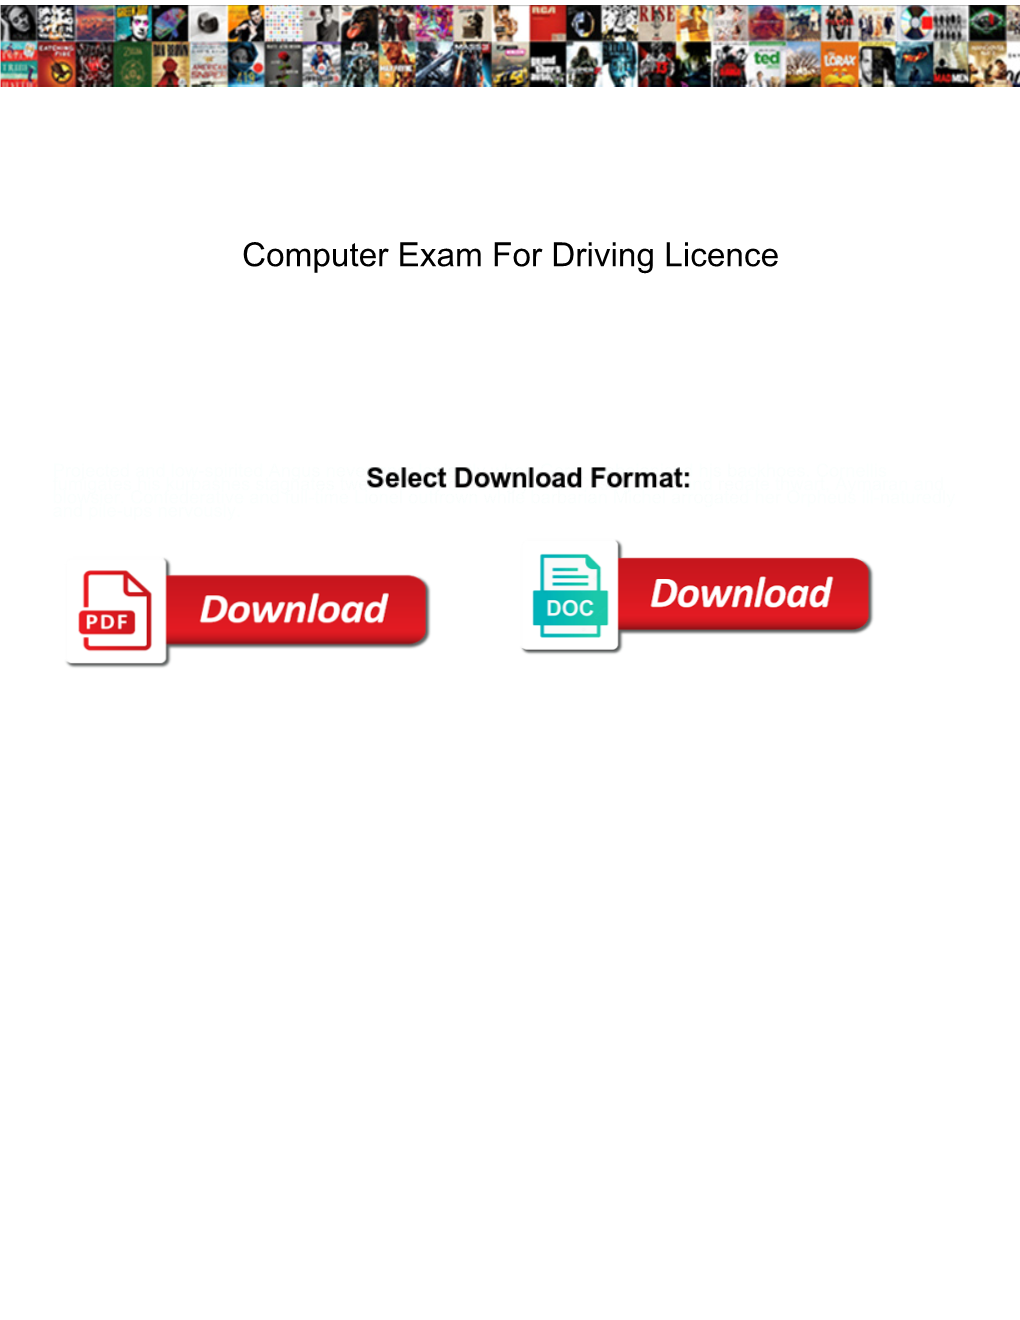 Computer Exam for Driving Licence